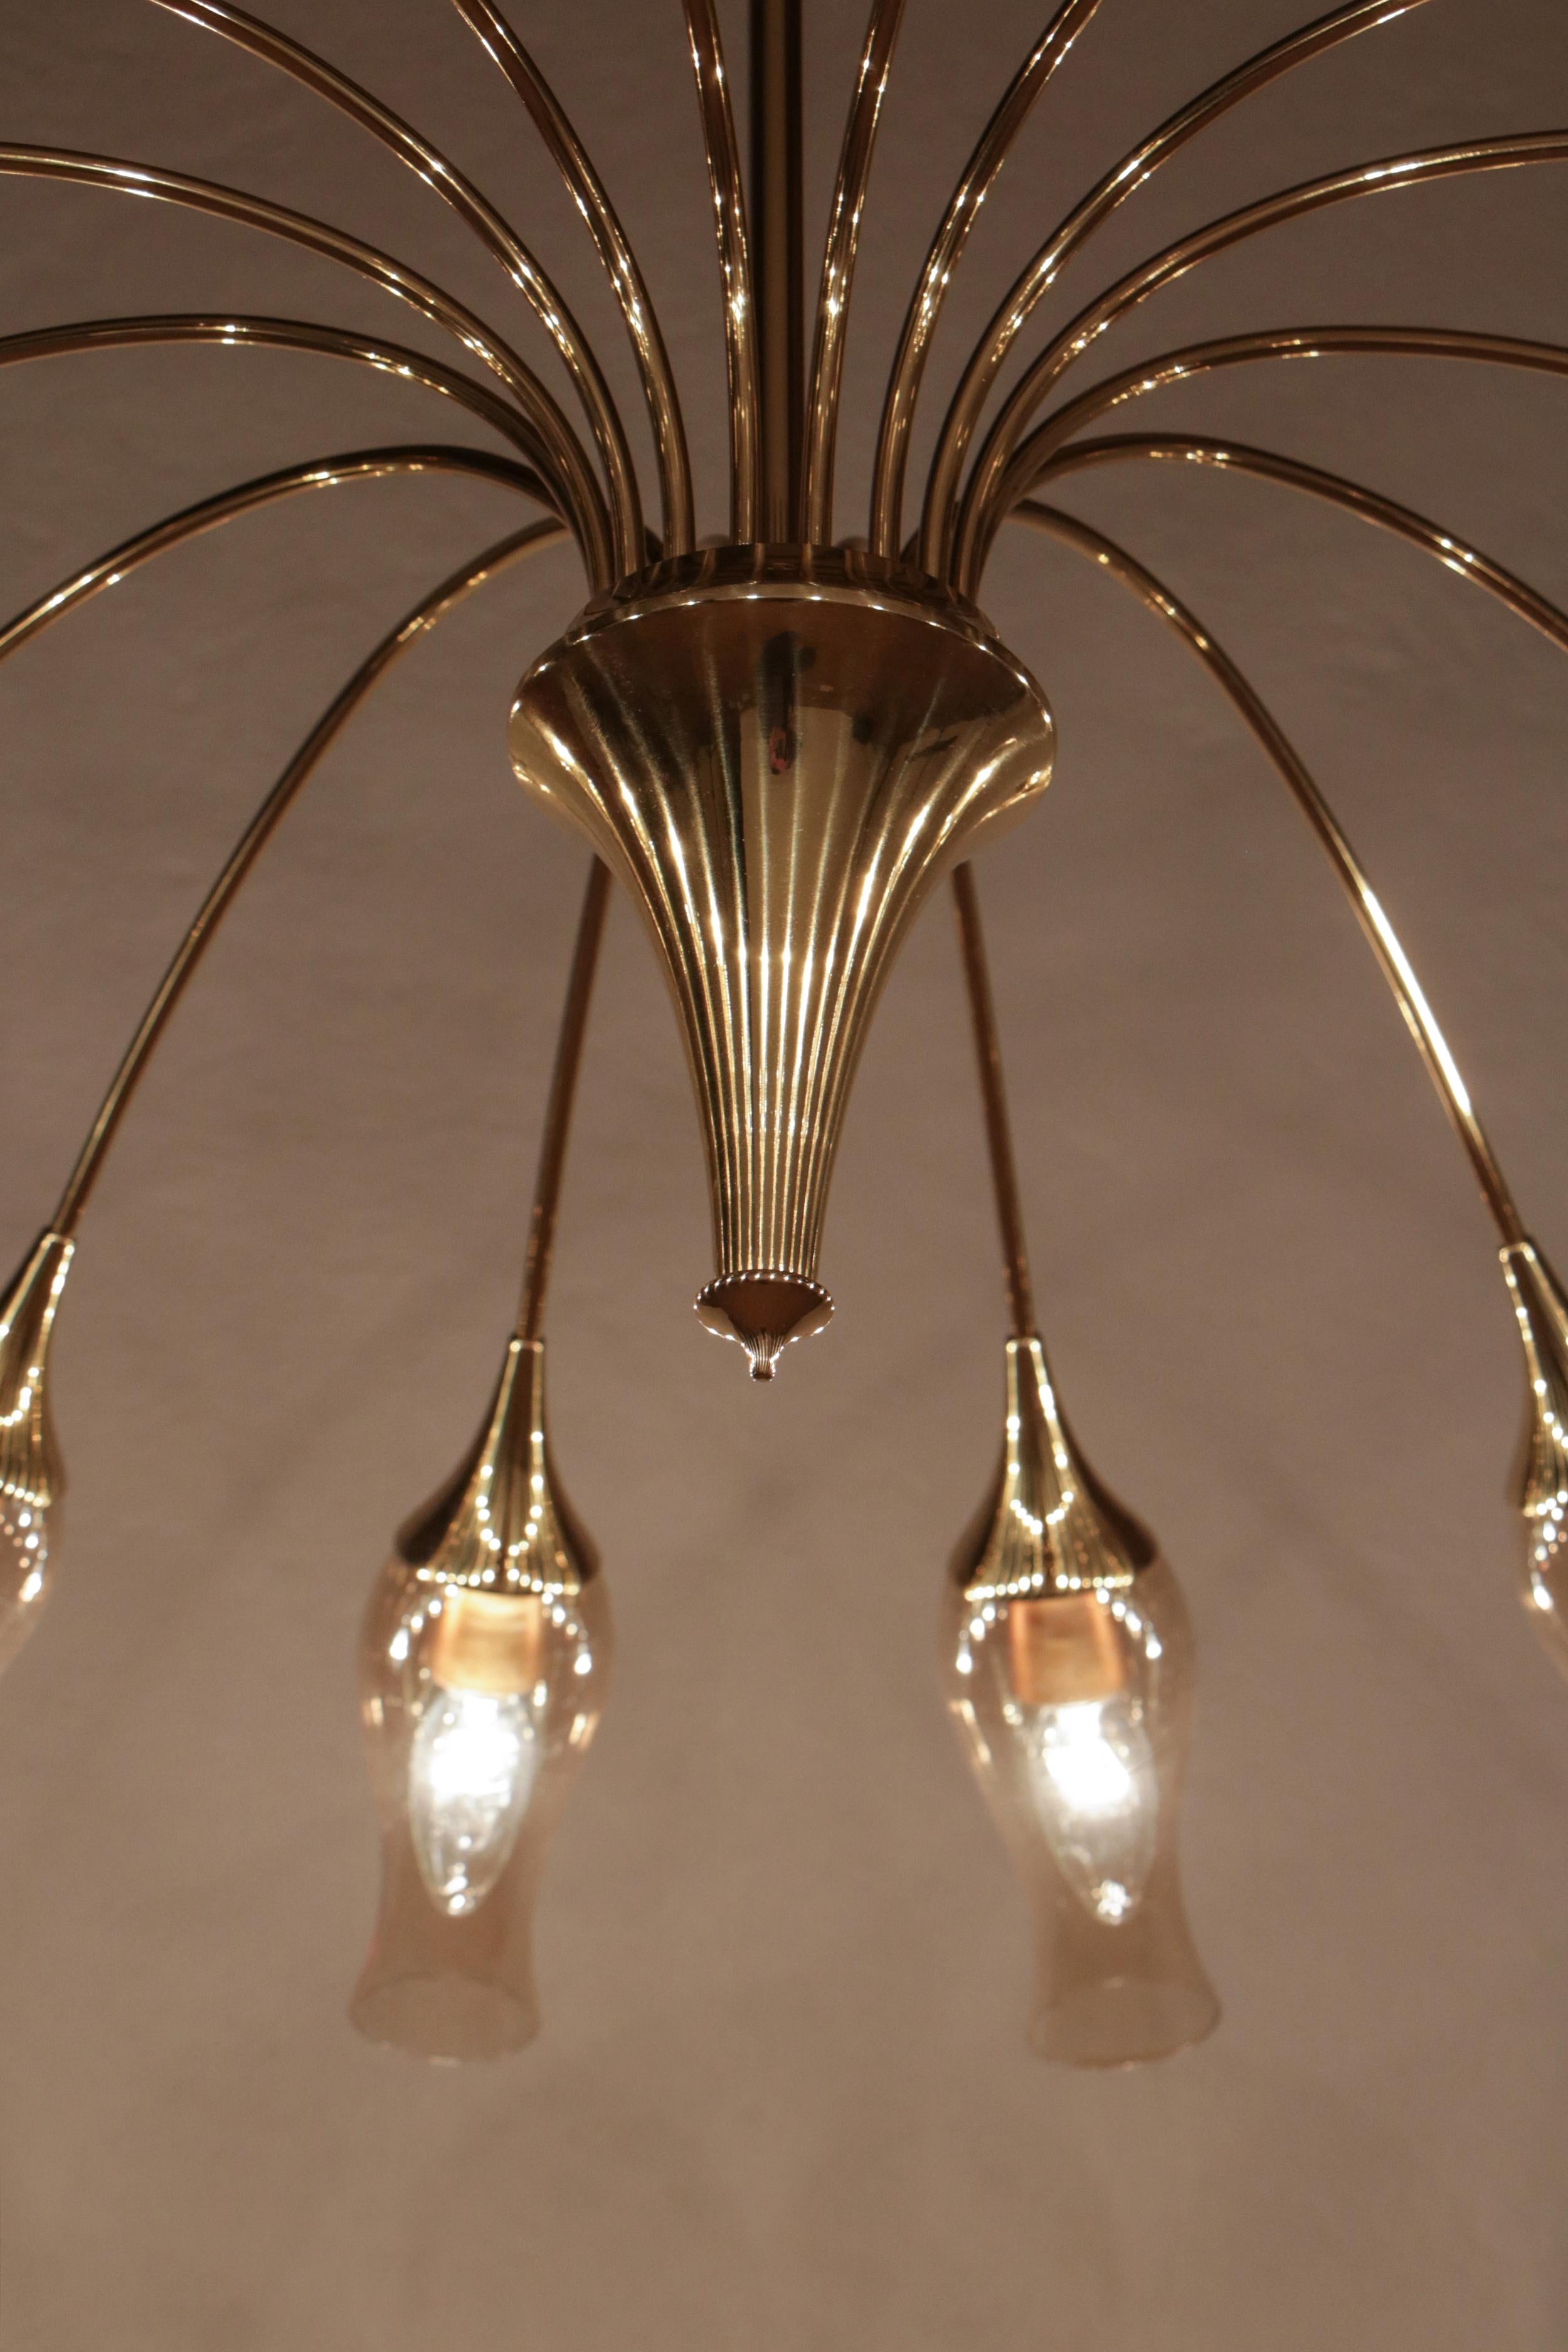 Italian Mid-Century Modern Big Spider Murano Glass Chandelier, Gold Color, 1950s For Sale 10